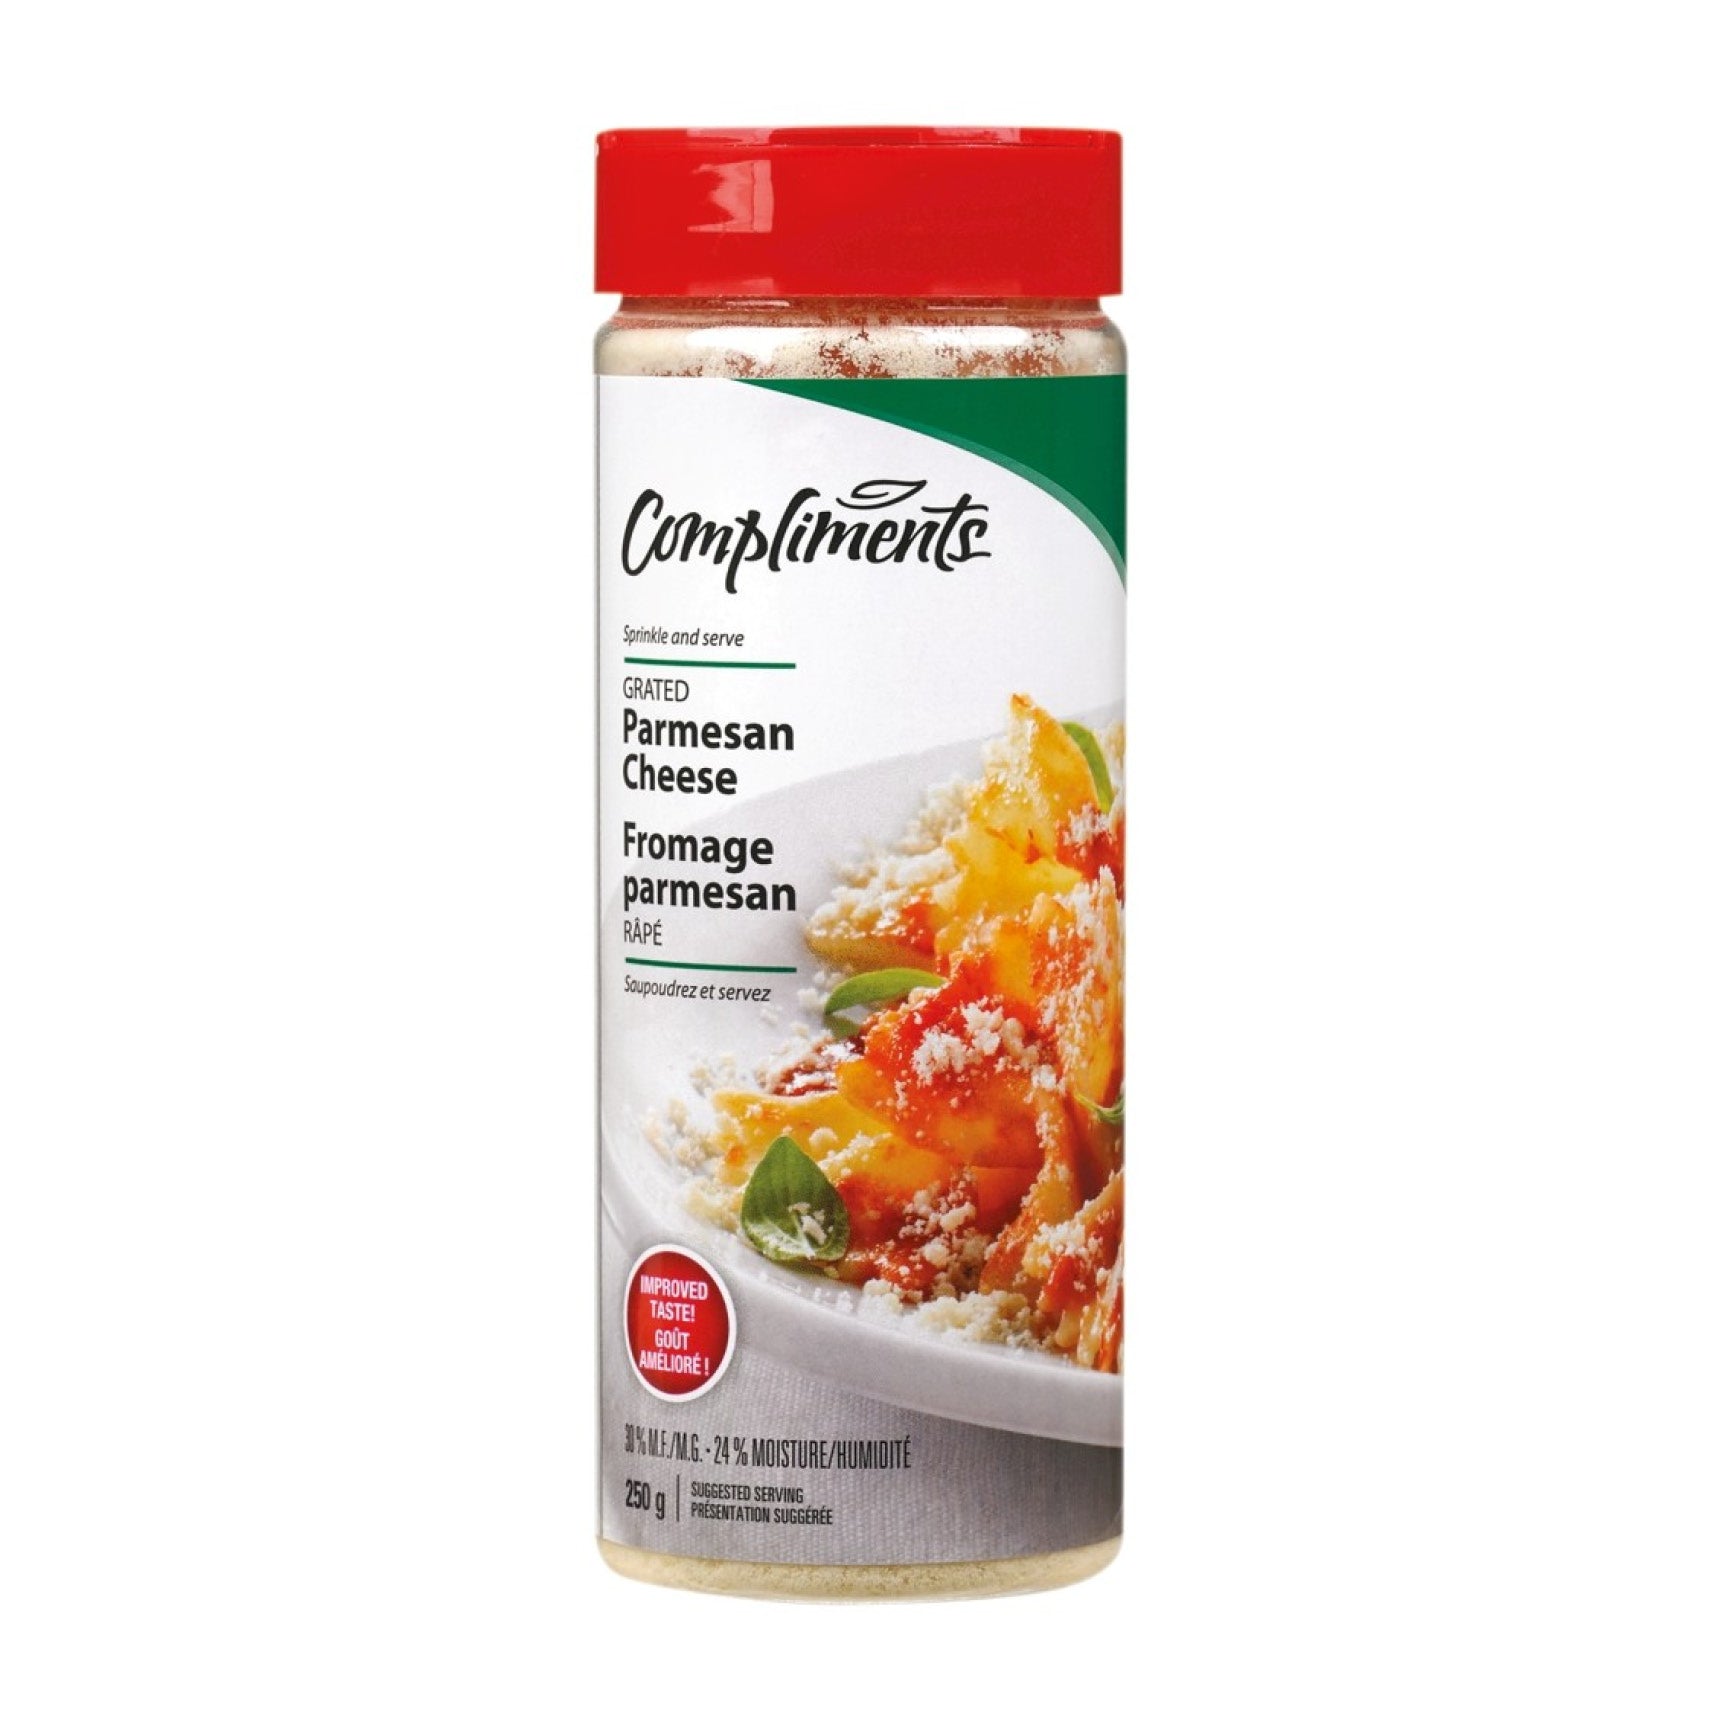 Compliments Grated Parmesan Cheese, 250g